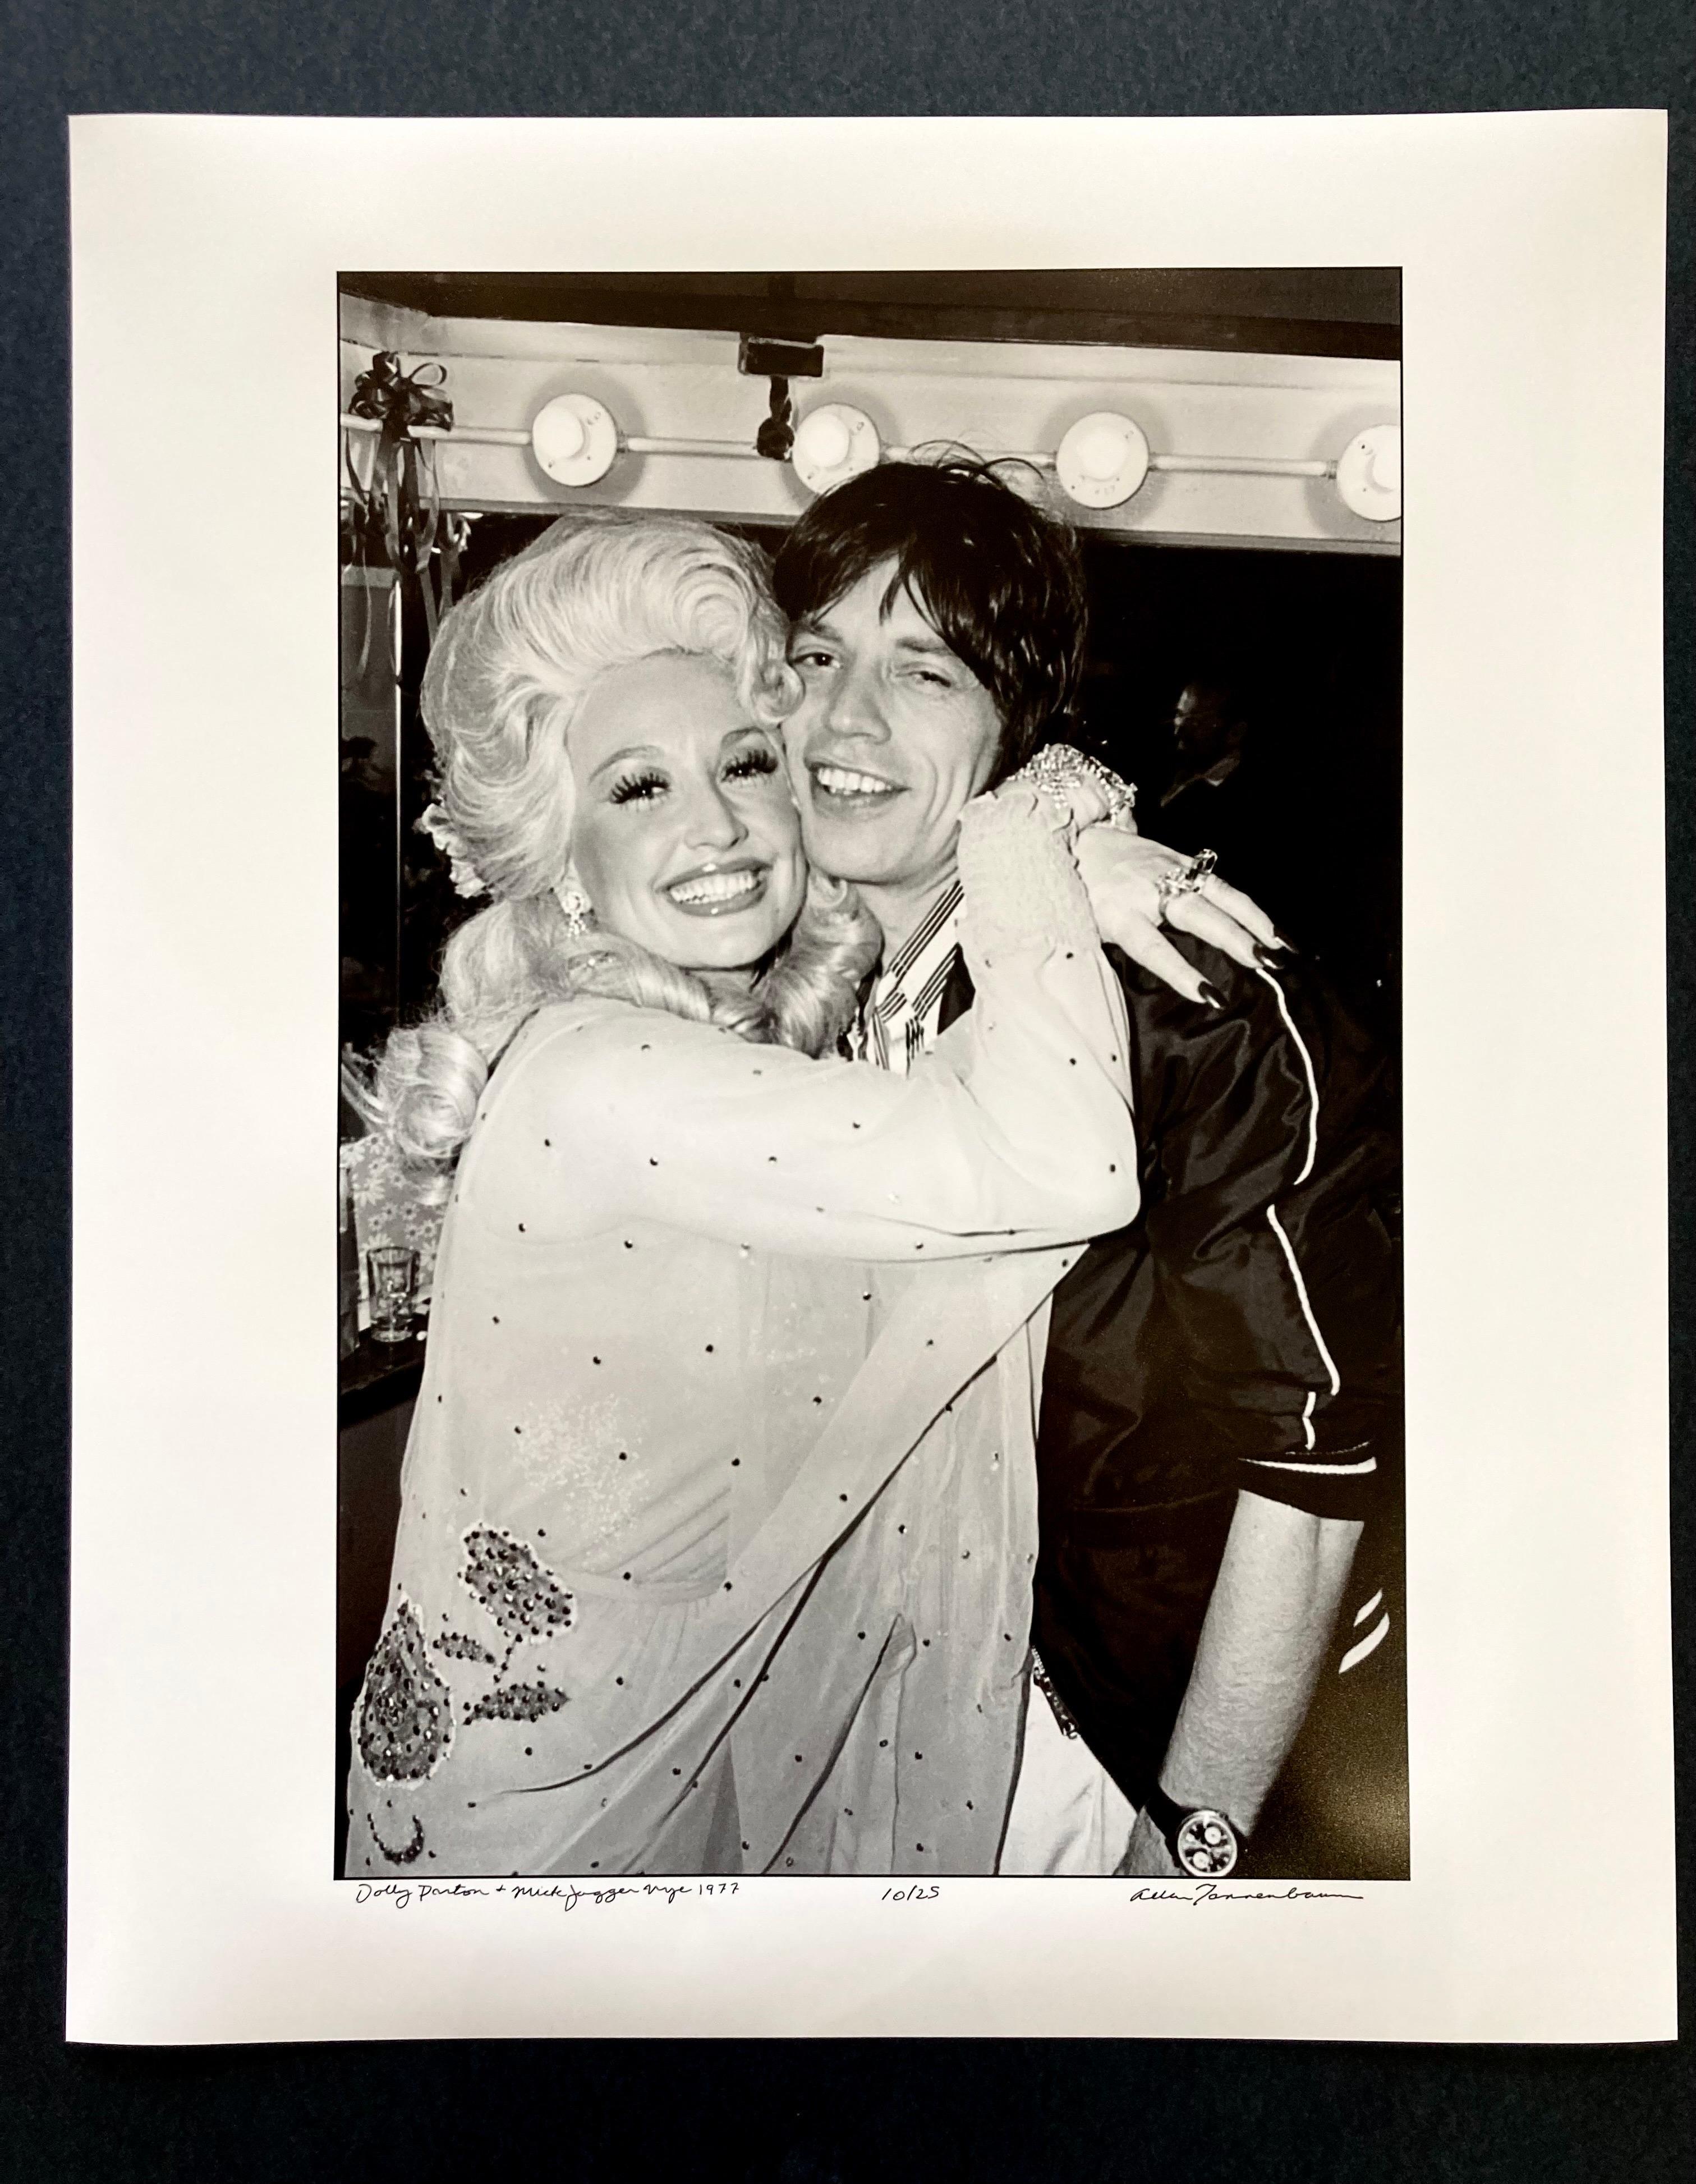 Dolly Parton and Mick Jagger hugging - Photograph by Allan Tannenbaum